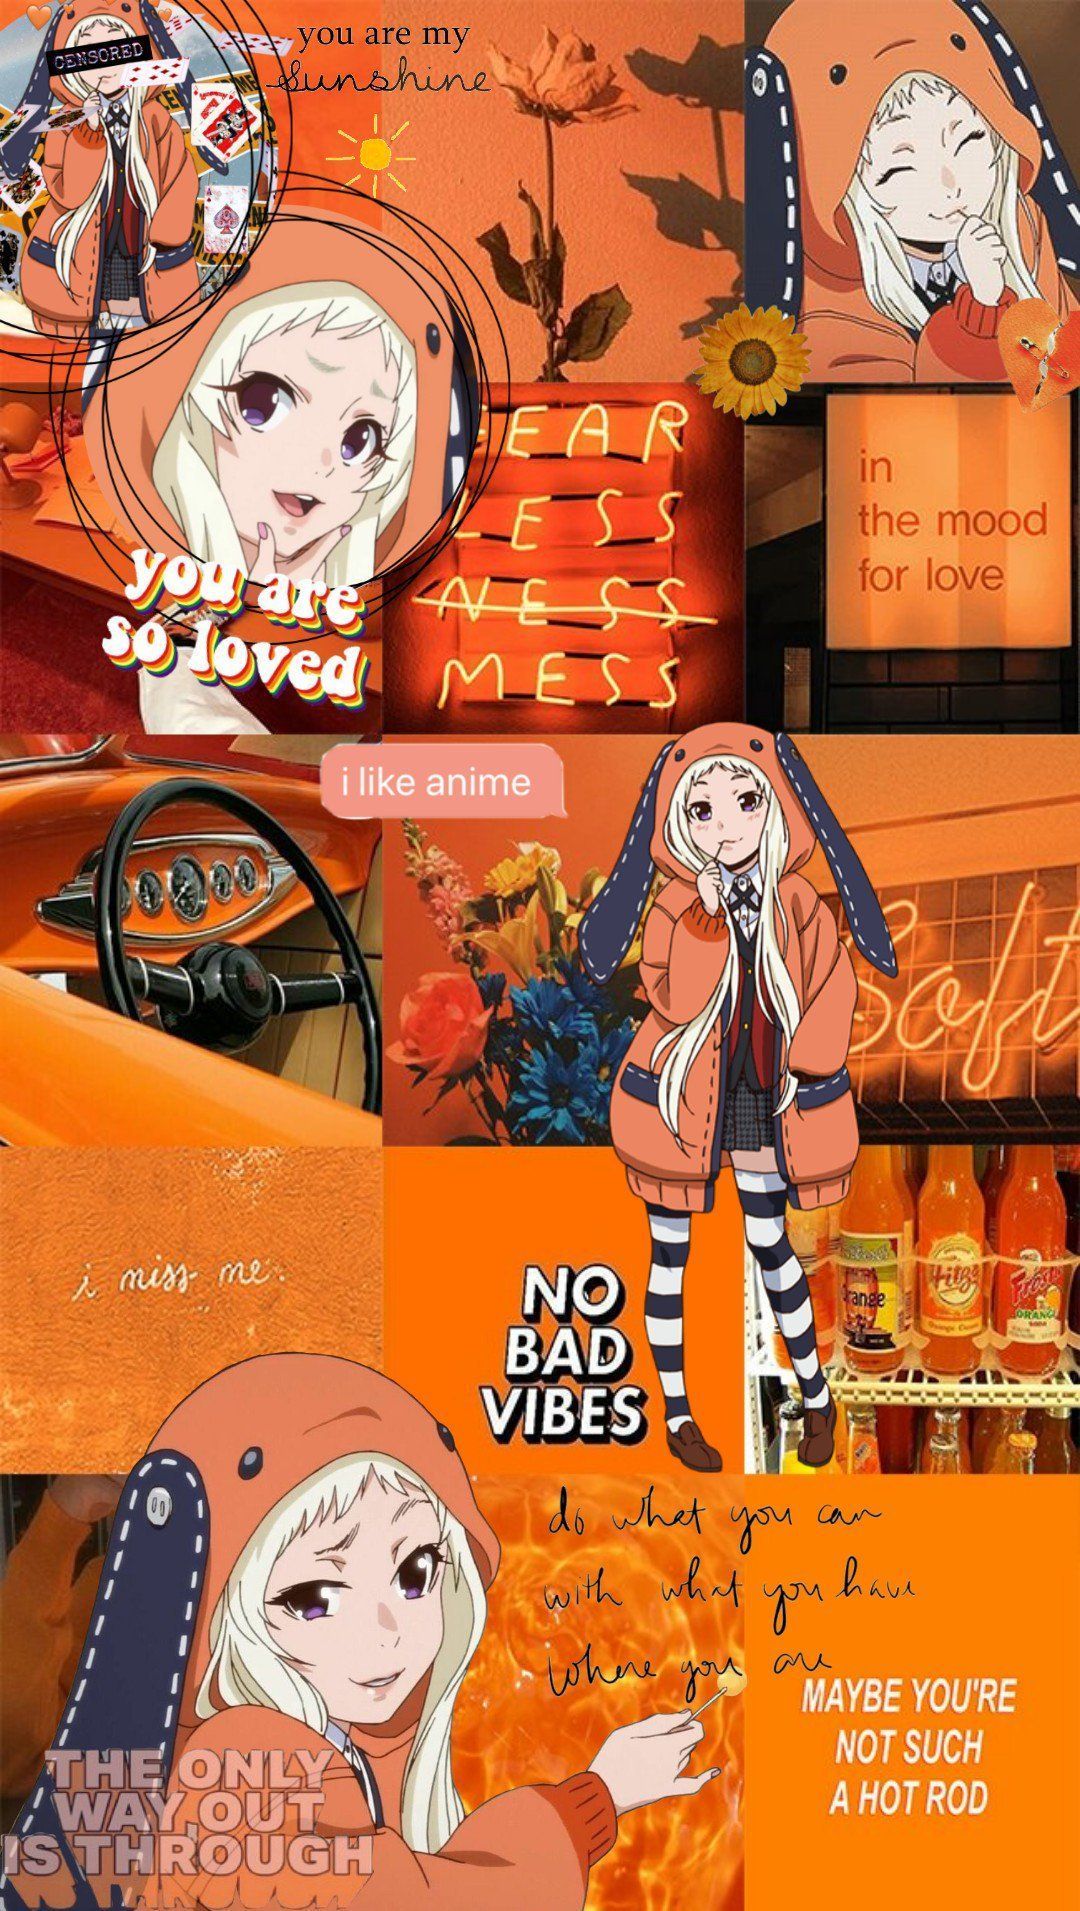 20+ Anime Orange HD Wallpapers and Backgrounds